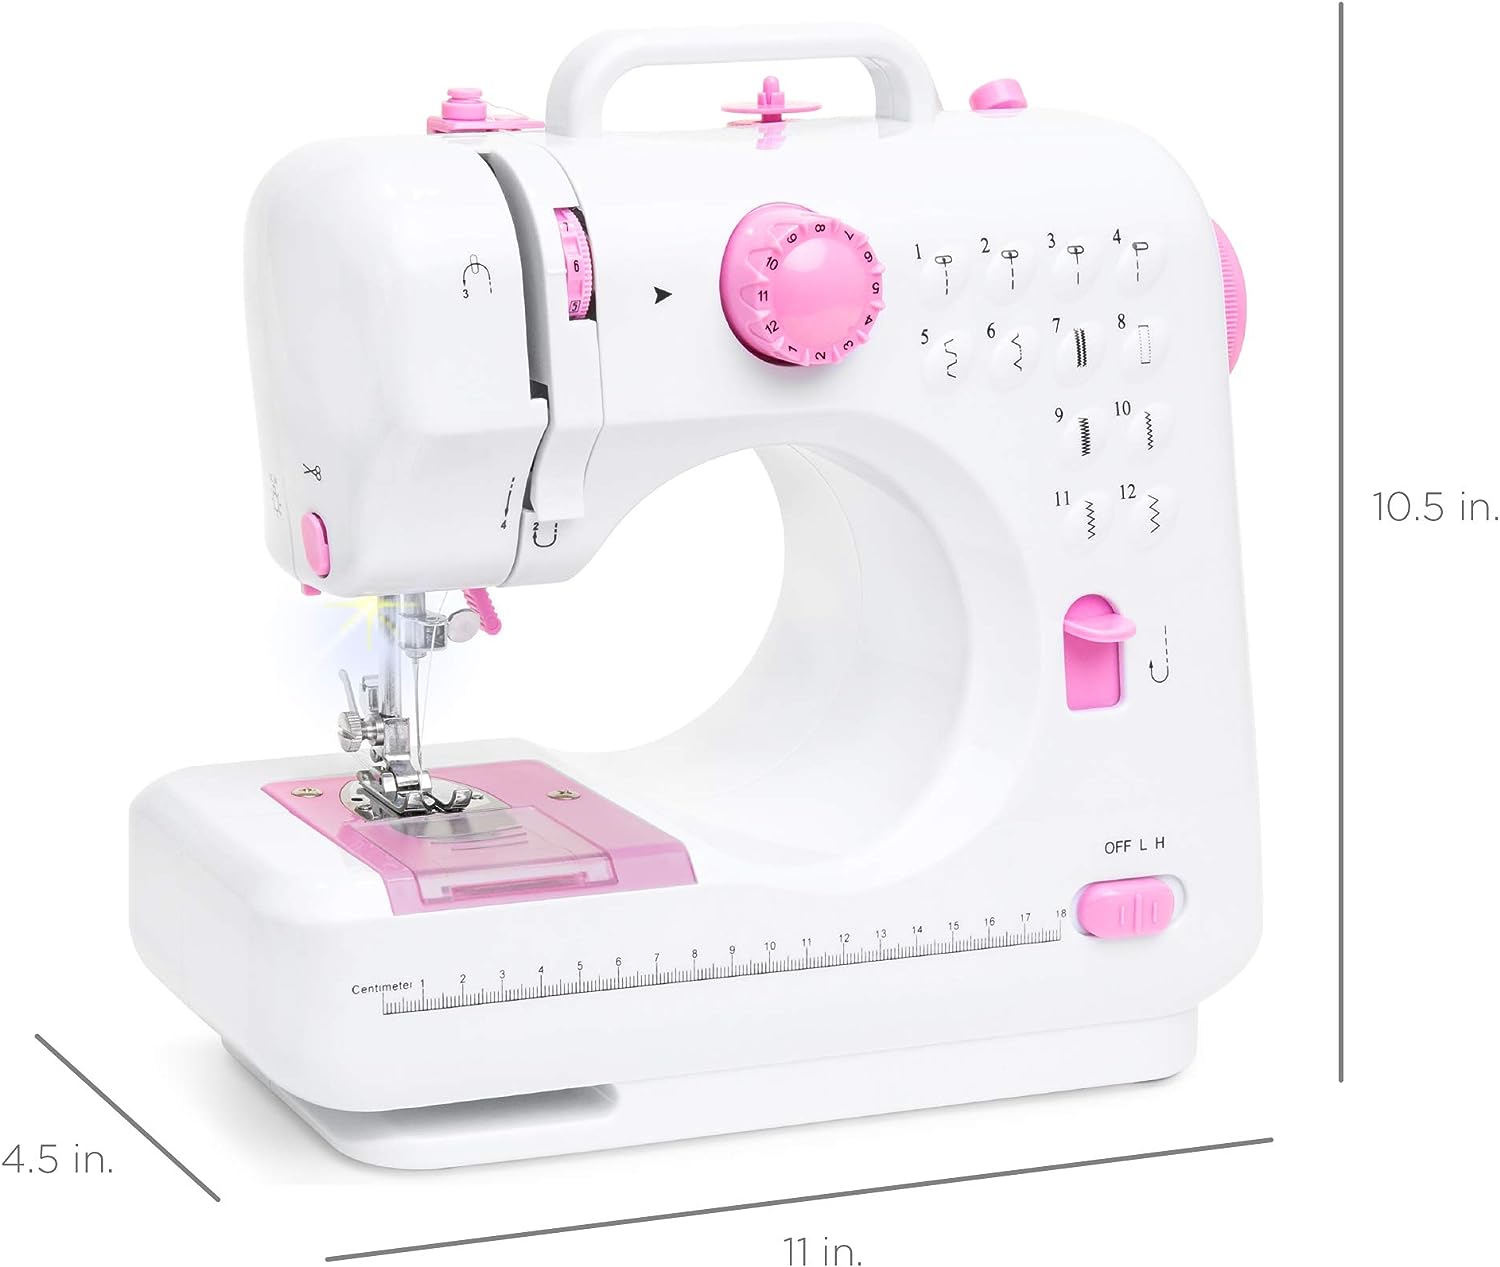 Best Choice Products Compact Sewing Machine, 42-Piece Beginners Kit,  Multifunctional Portable 6V Beginner Sewing Machine w/ 12 Stitch Patterns,  Light, Foot Pedal, Storage Drawer - Pink/White